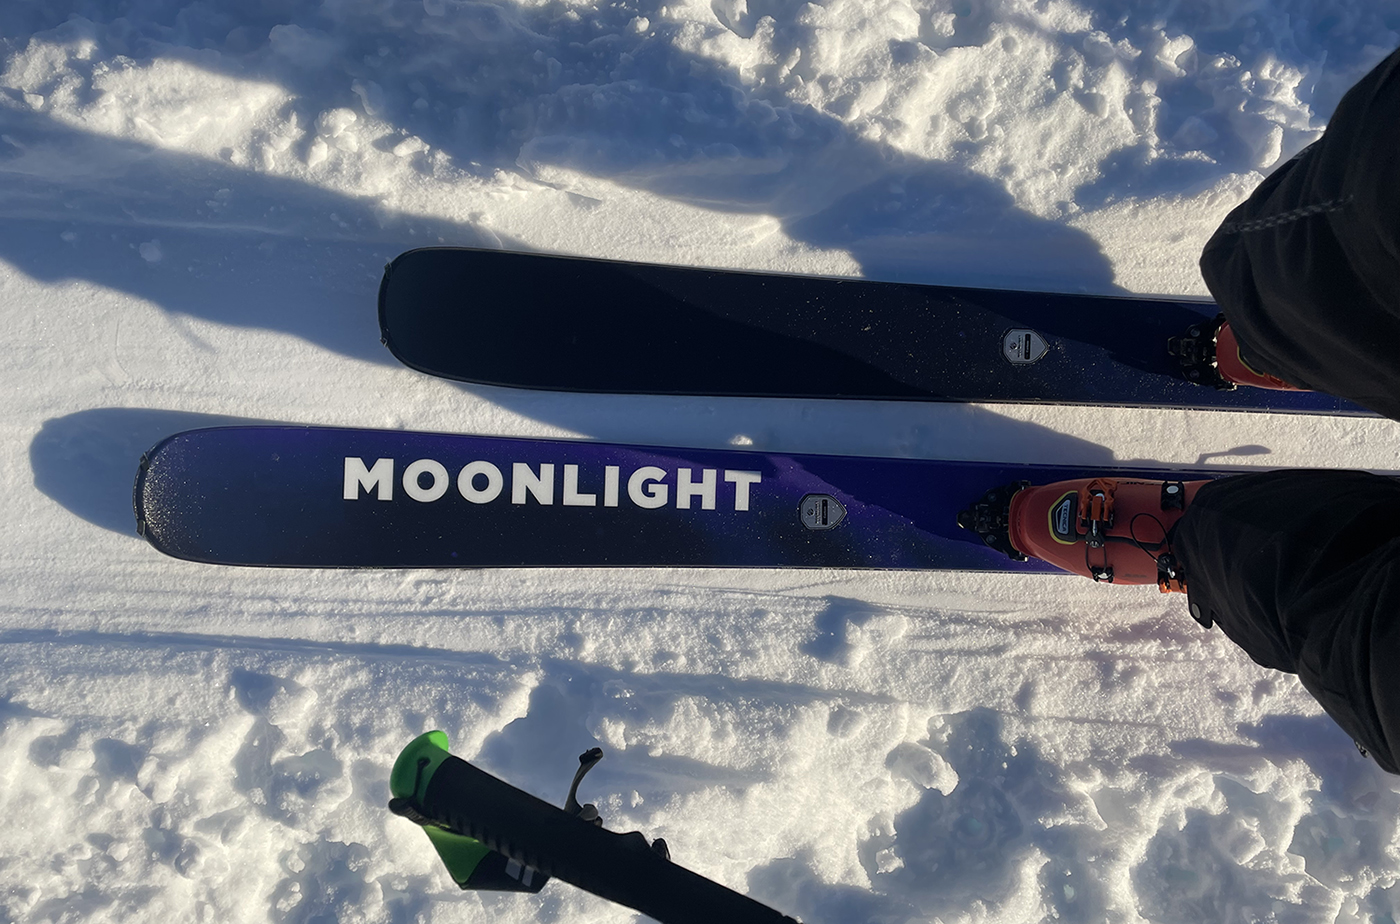 On GEAR:30, we discuss some of the backcountry gear that Paul’s been testing in Alaska, including Moonlight and Movement skis; Moment and Dynafit bindings; G3 and Pomoca skins; and Scarpa boots. We also discuss current trends (fads?) in ski poles, and the underrated value of a good snow saw.